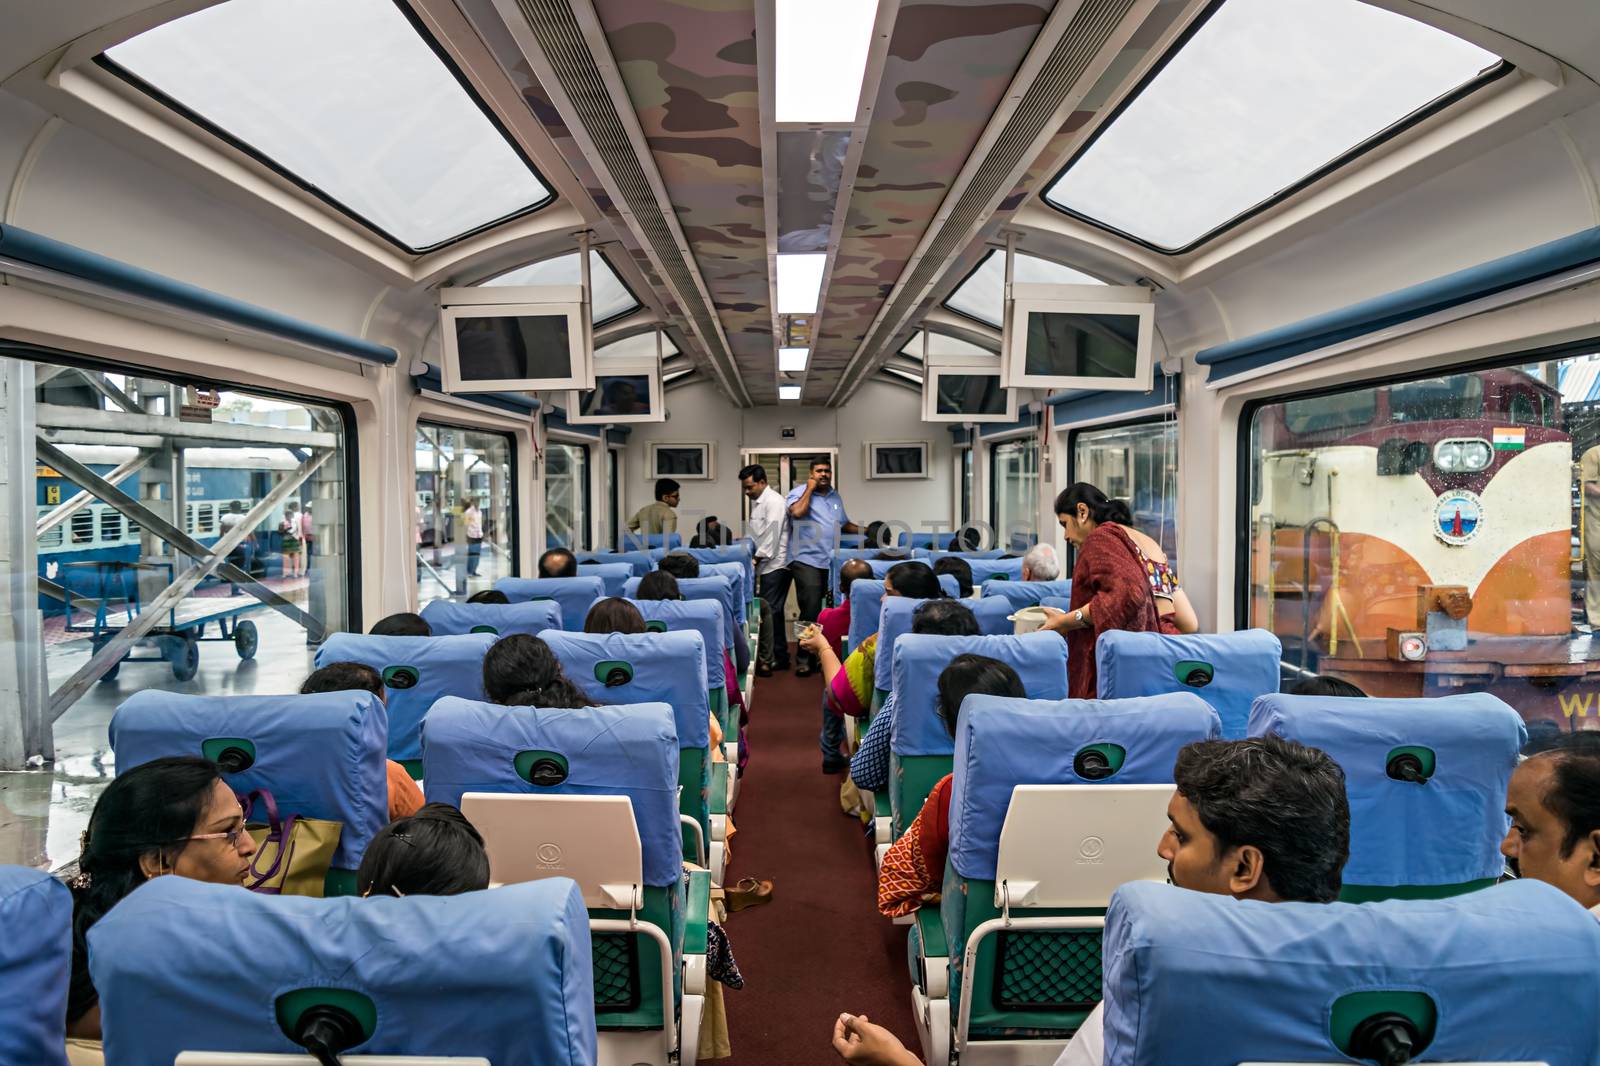 Visakhapatnam, Andhra Pradesh, India : August 28th , 2018 - Interiors of glass-roofed Vistadome coach, which offers breathtaking p by lalam